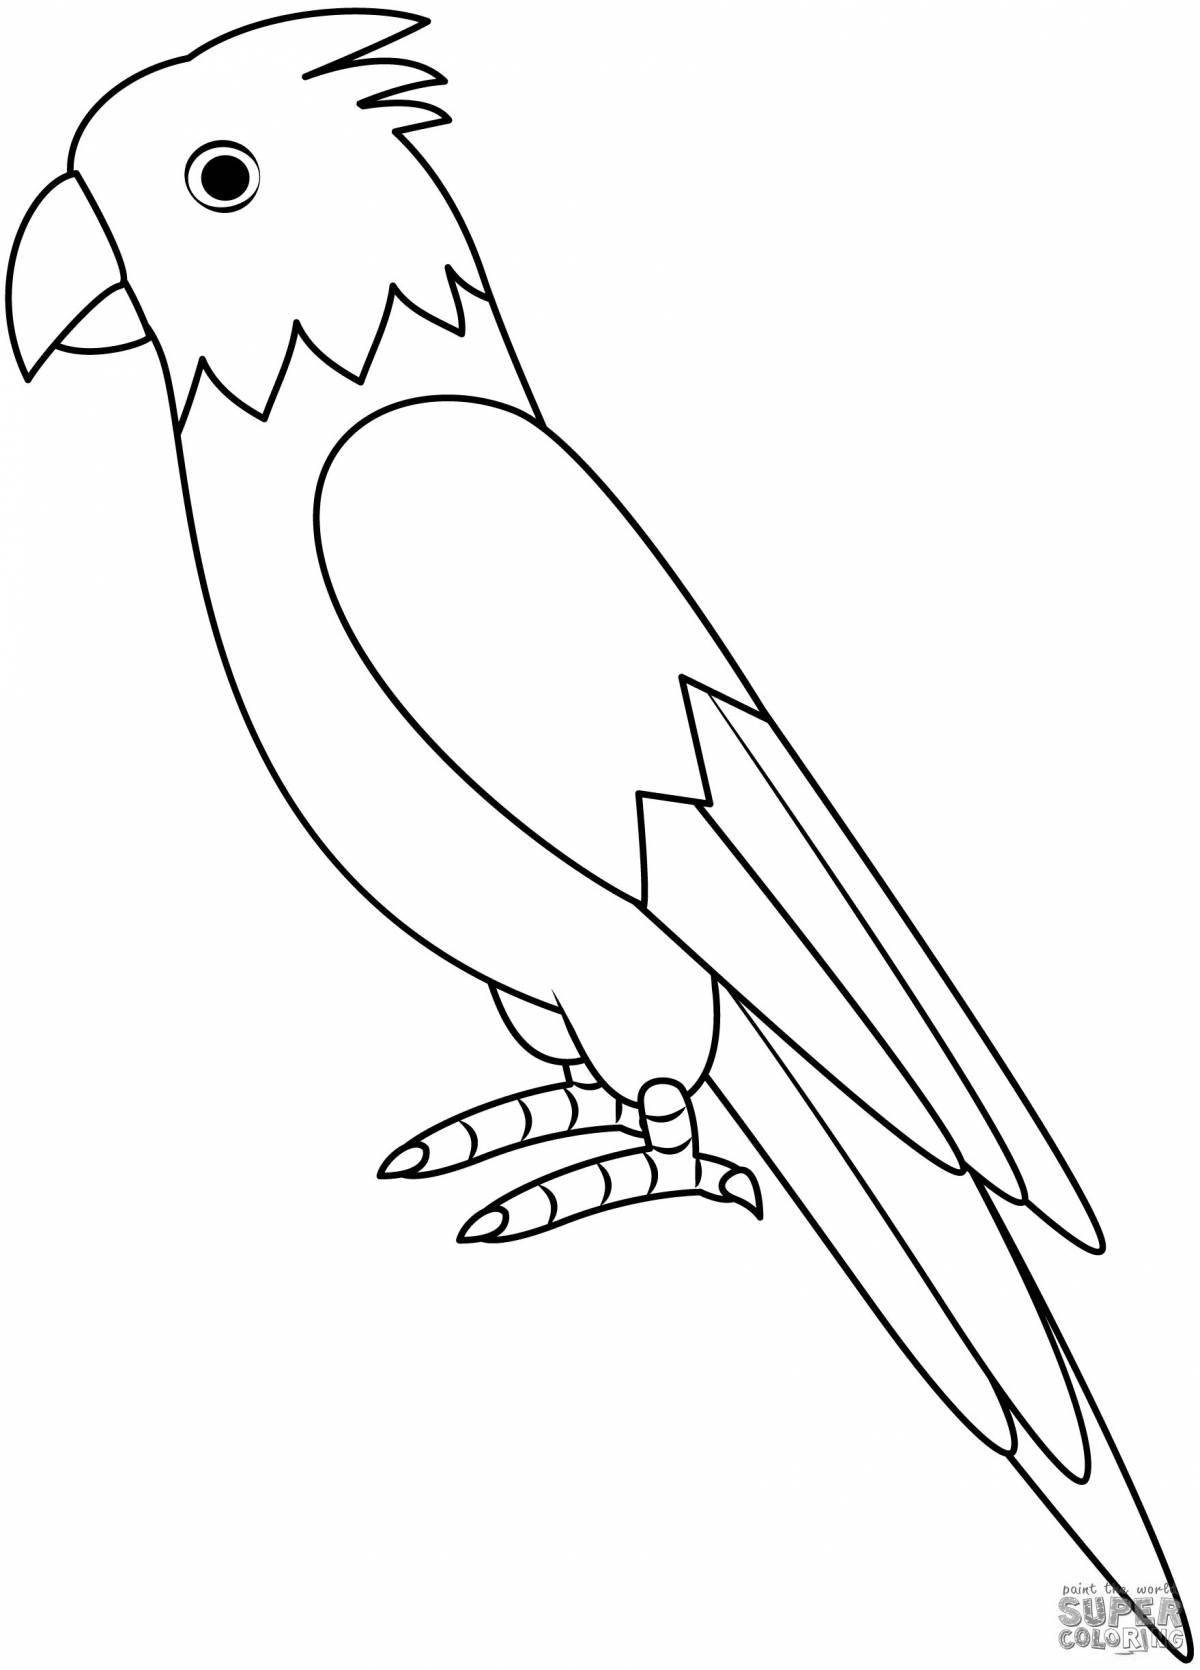 Coloring parrot for children 6-7 years old